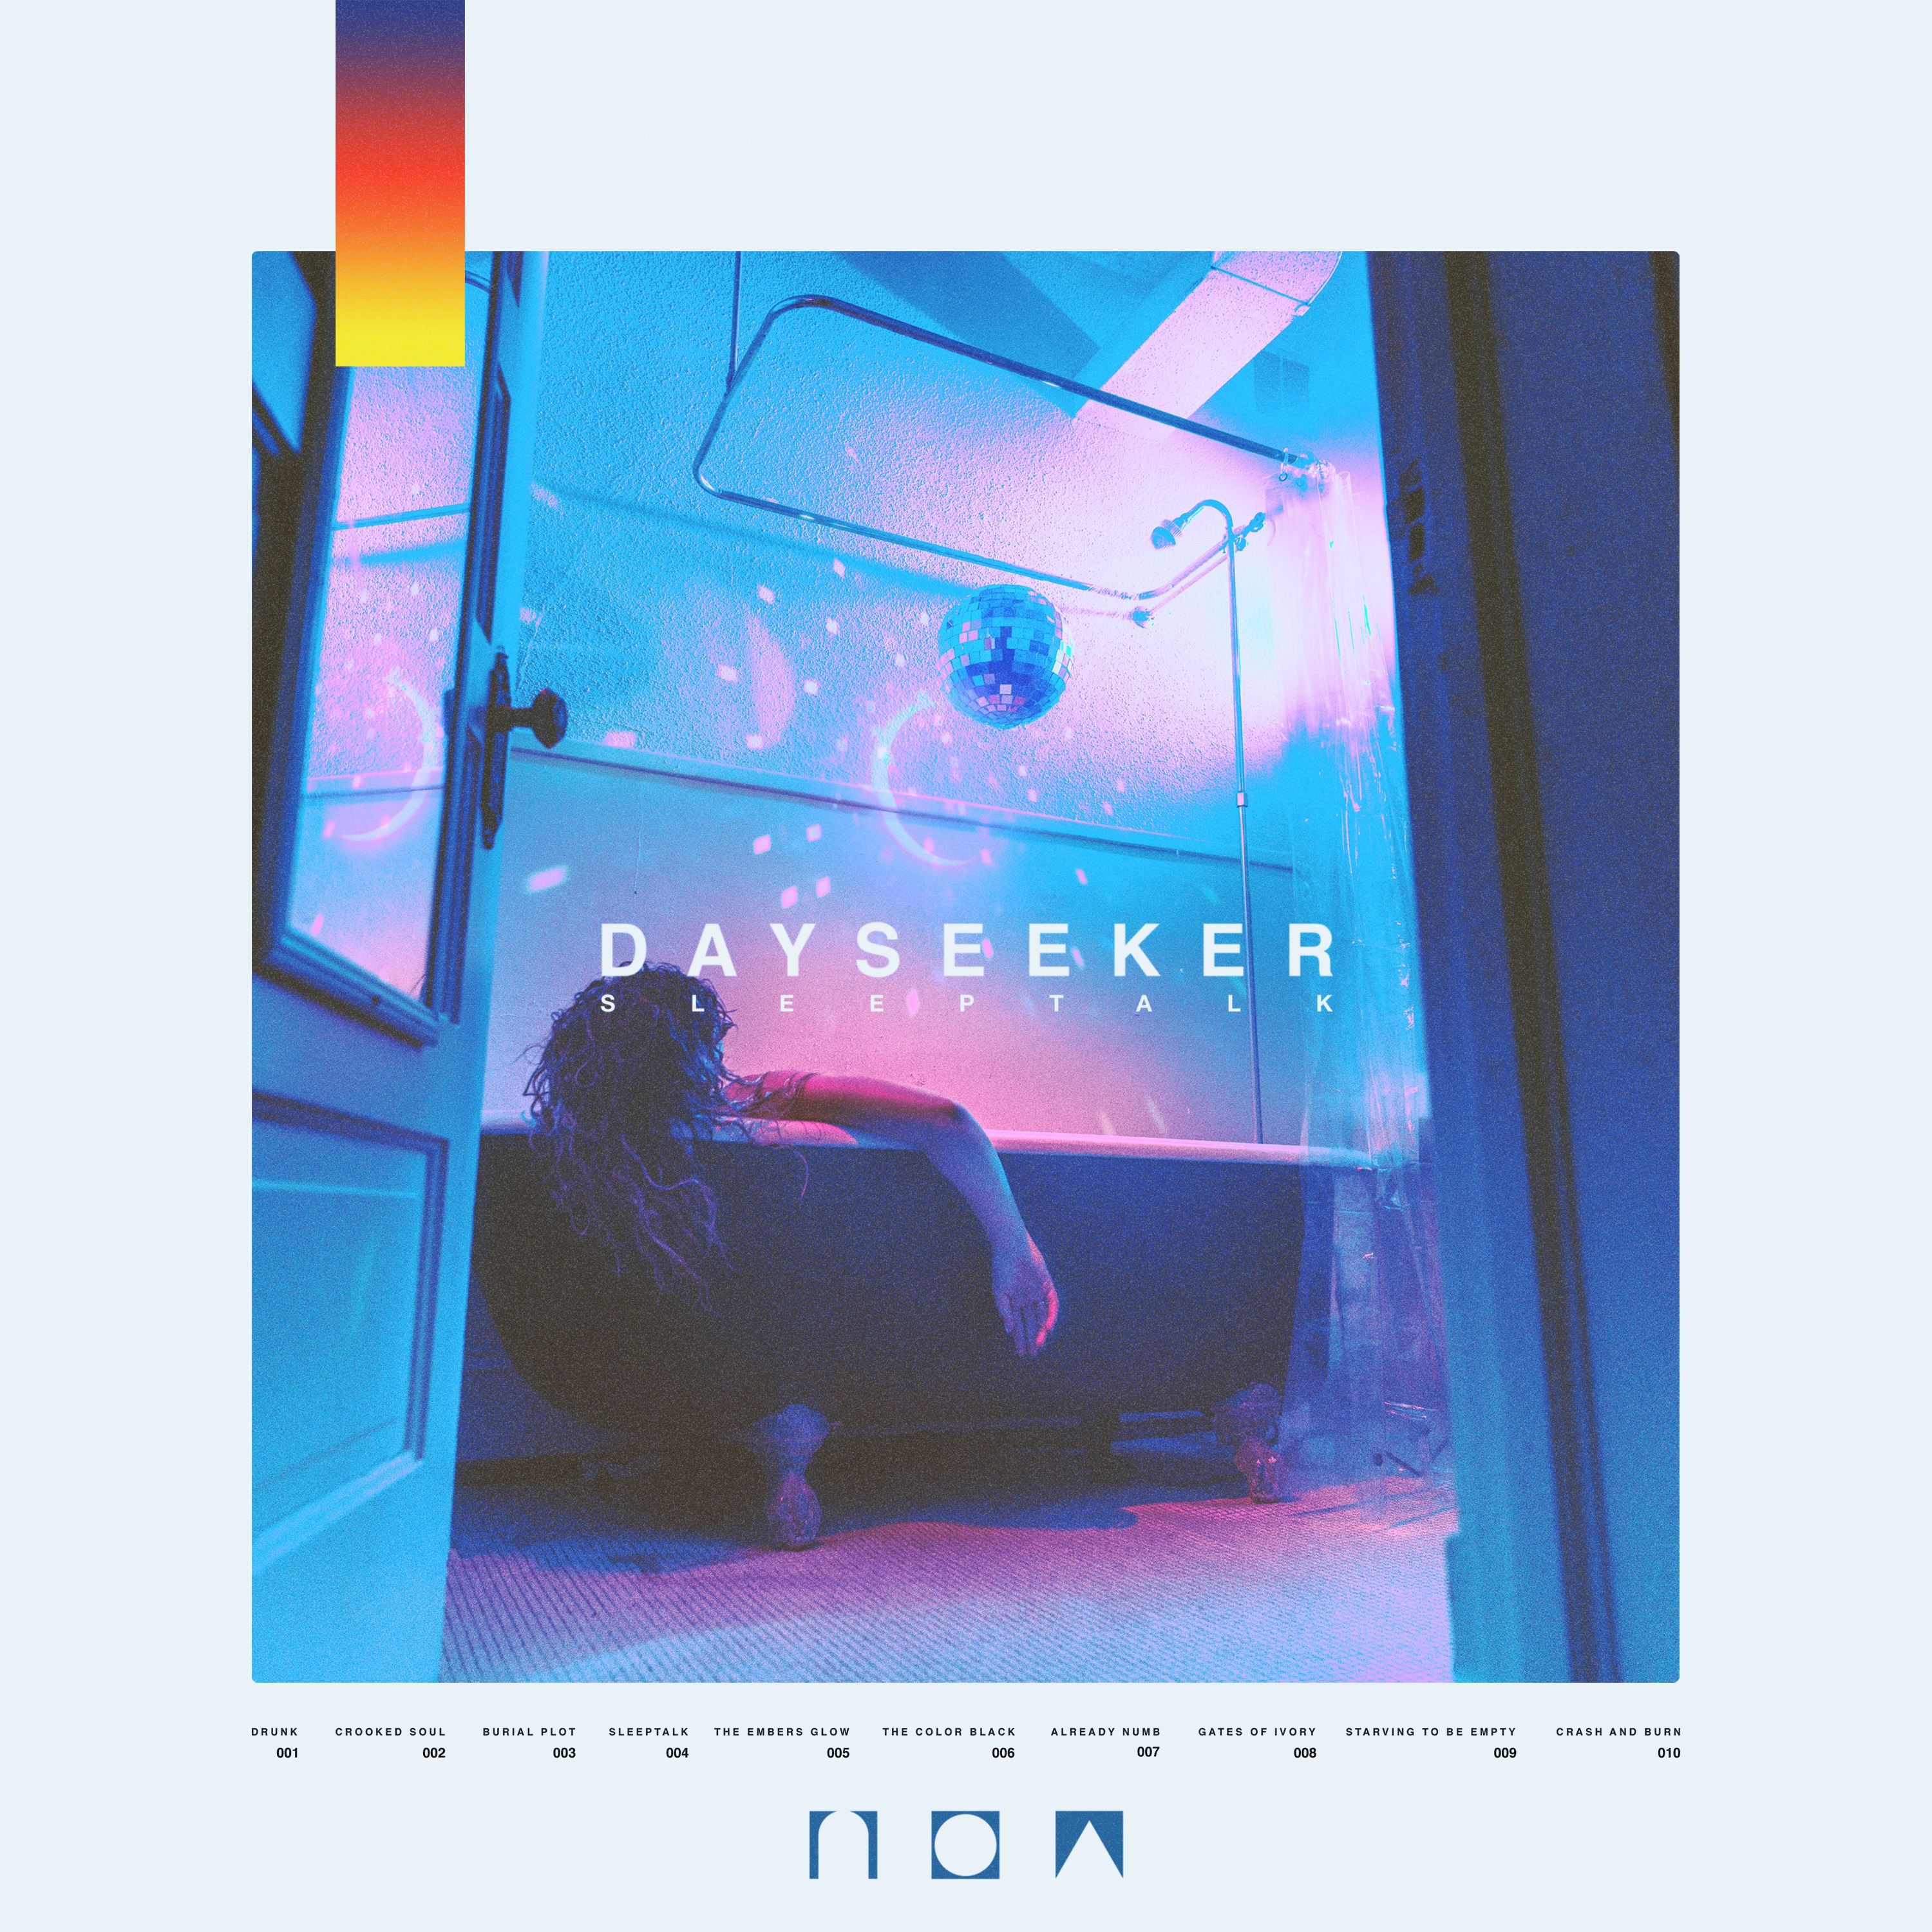 The New Album From Dayseeker Is A Shift In Sound Embracing